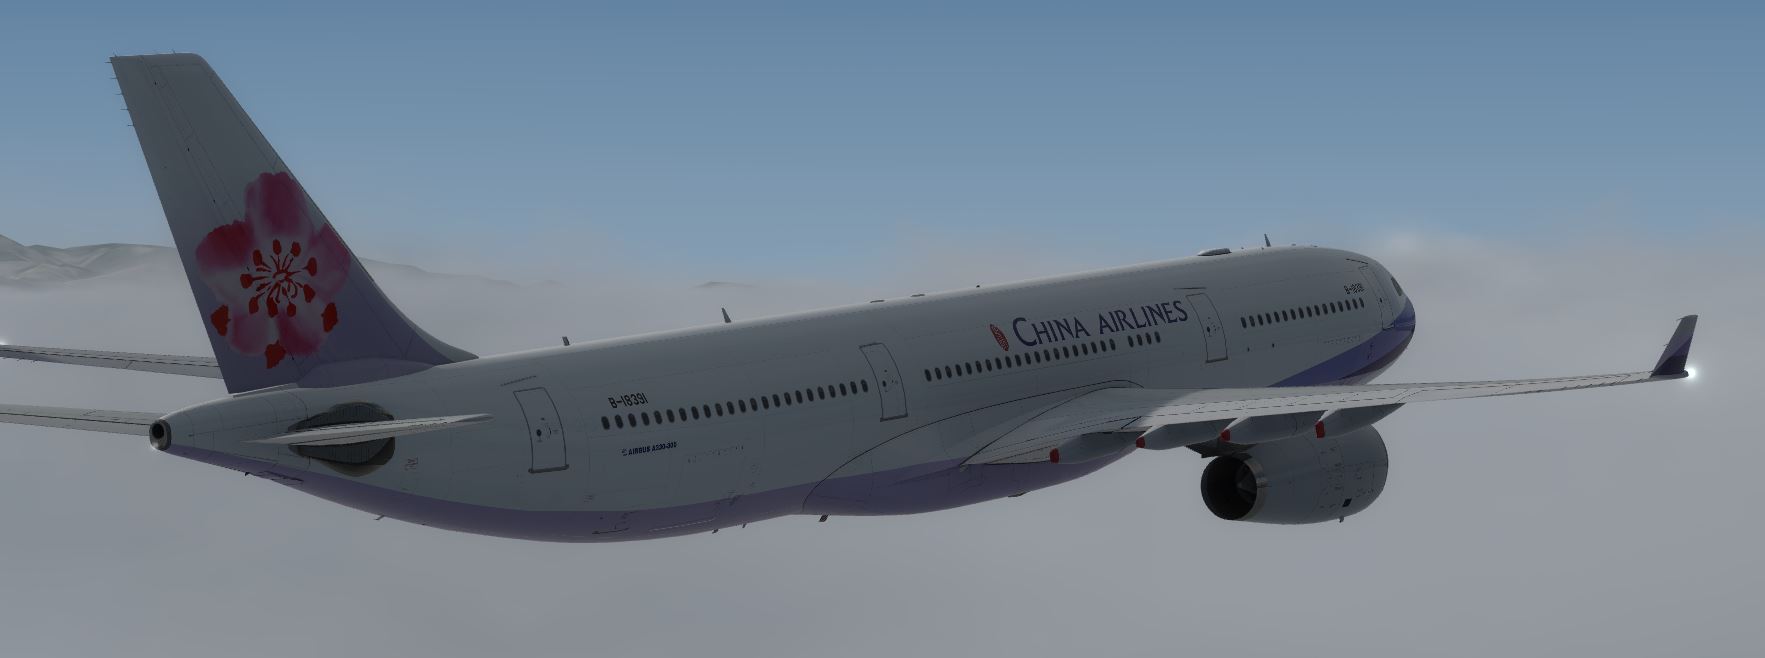 AS A330 ChinaAirline-5565 